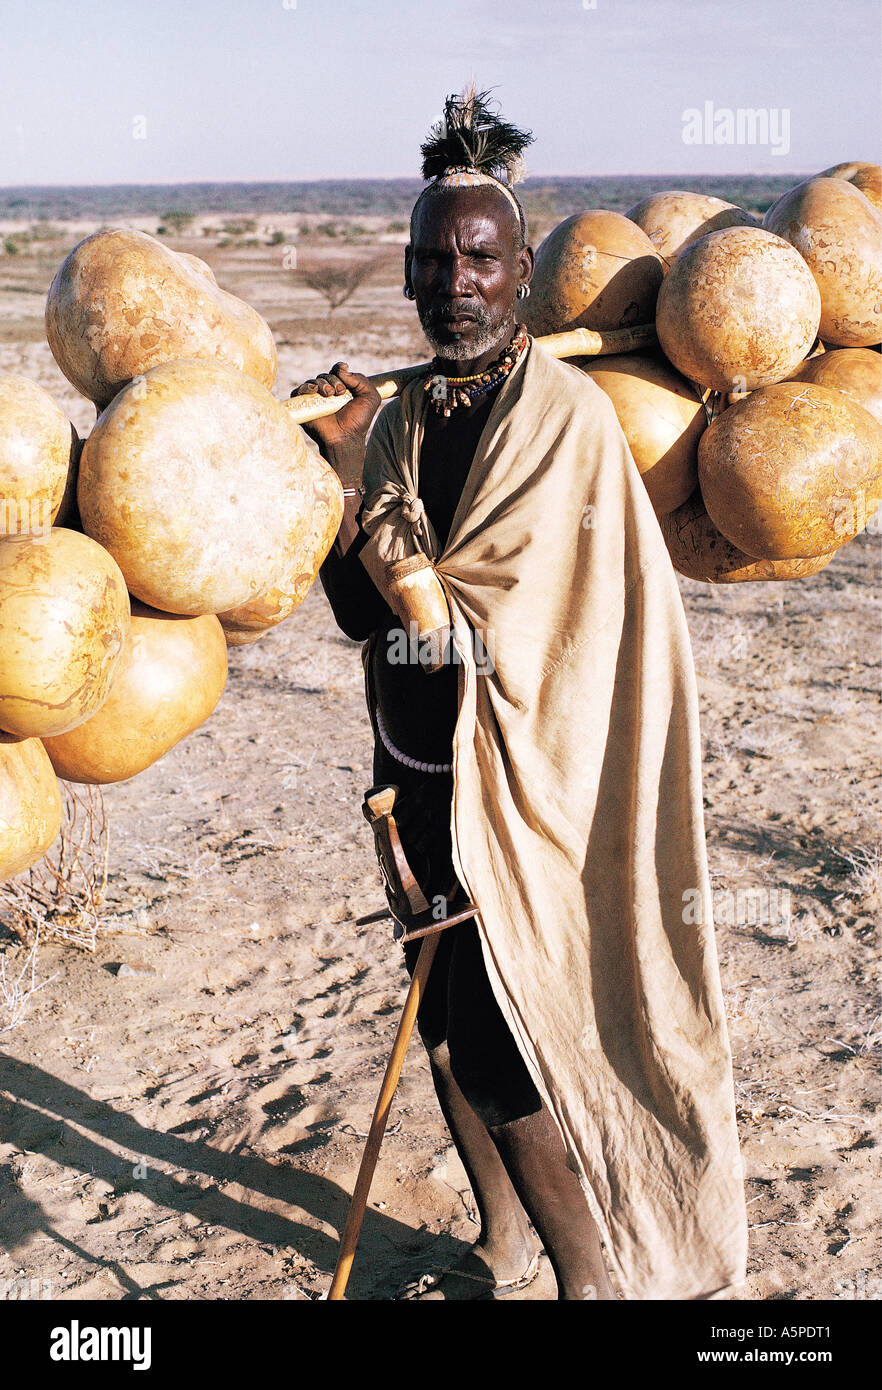 Turkana man carrying gourds to be used as water carriers Near Lodwar northern Kenya East Africa Stock Photo